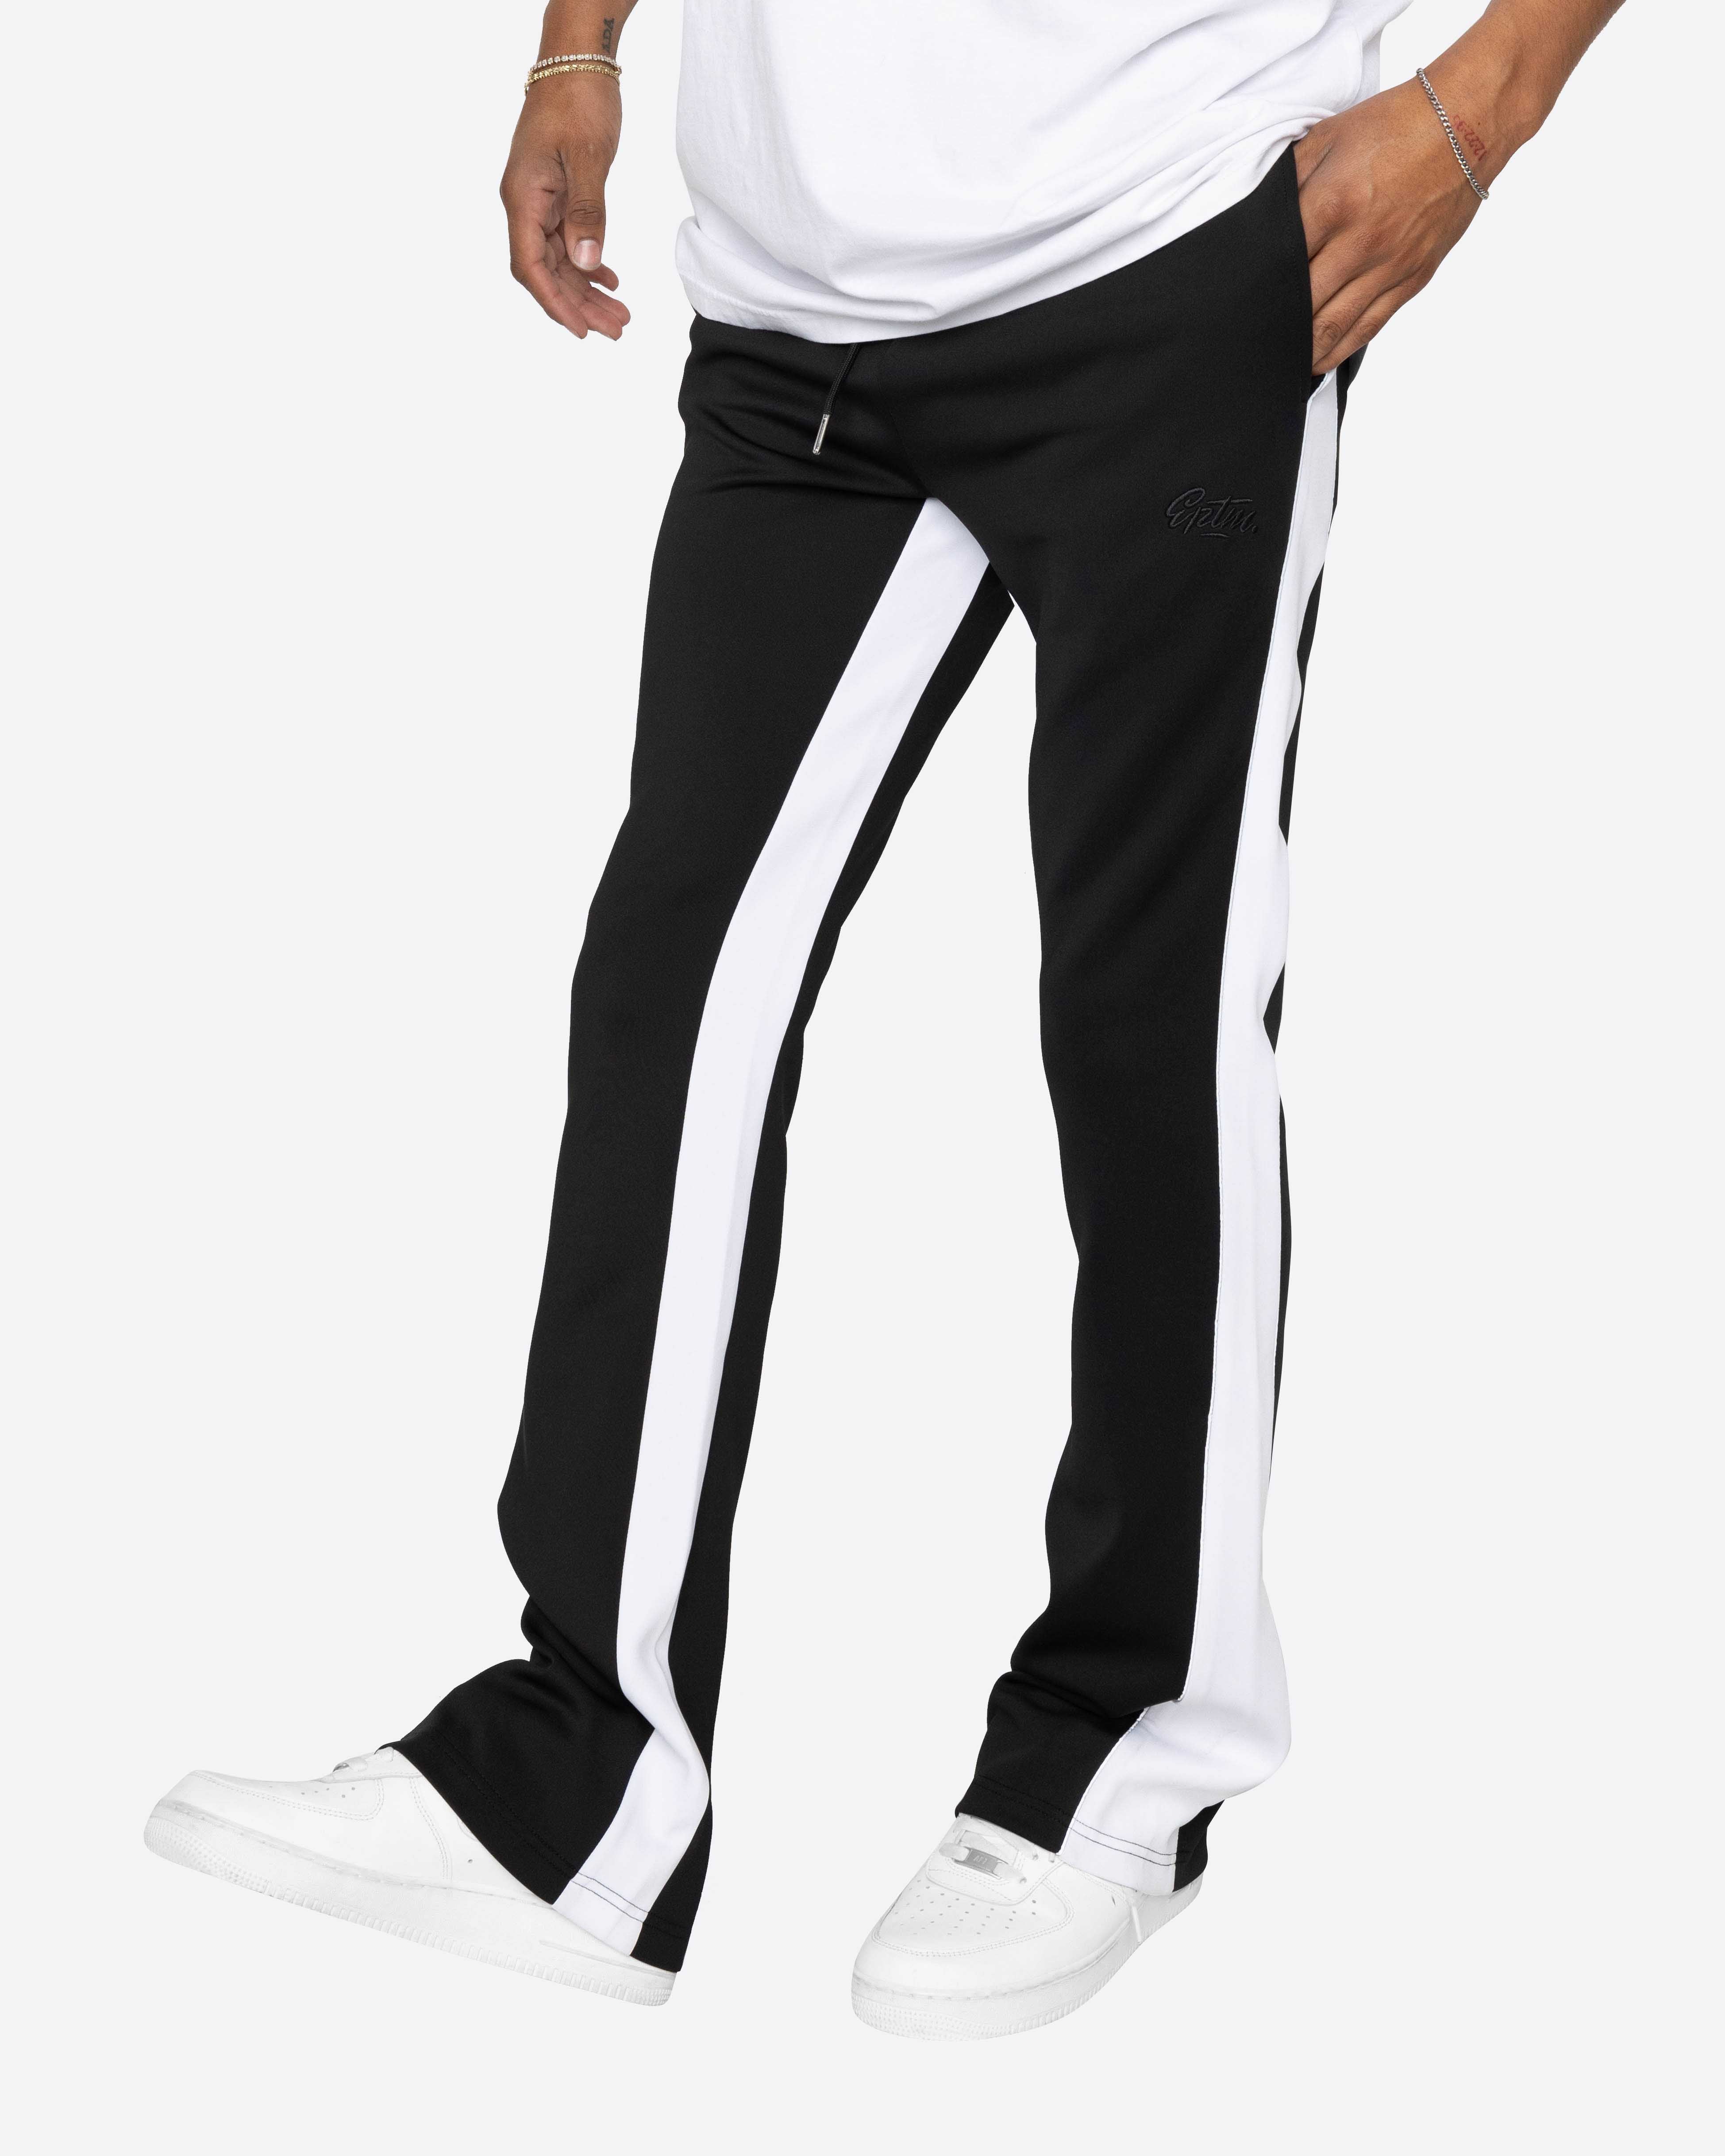 PIDOGYM Men's Athletic Running Sport Jogger Pants Slim Striped Workout  Casual Joggers Tapered Sweatpants White Medium